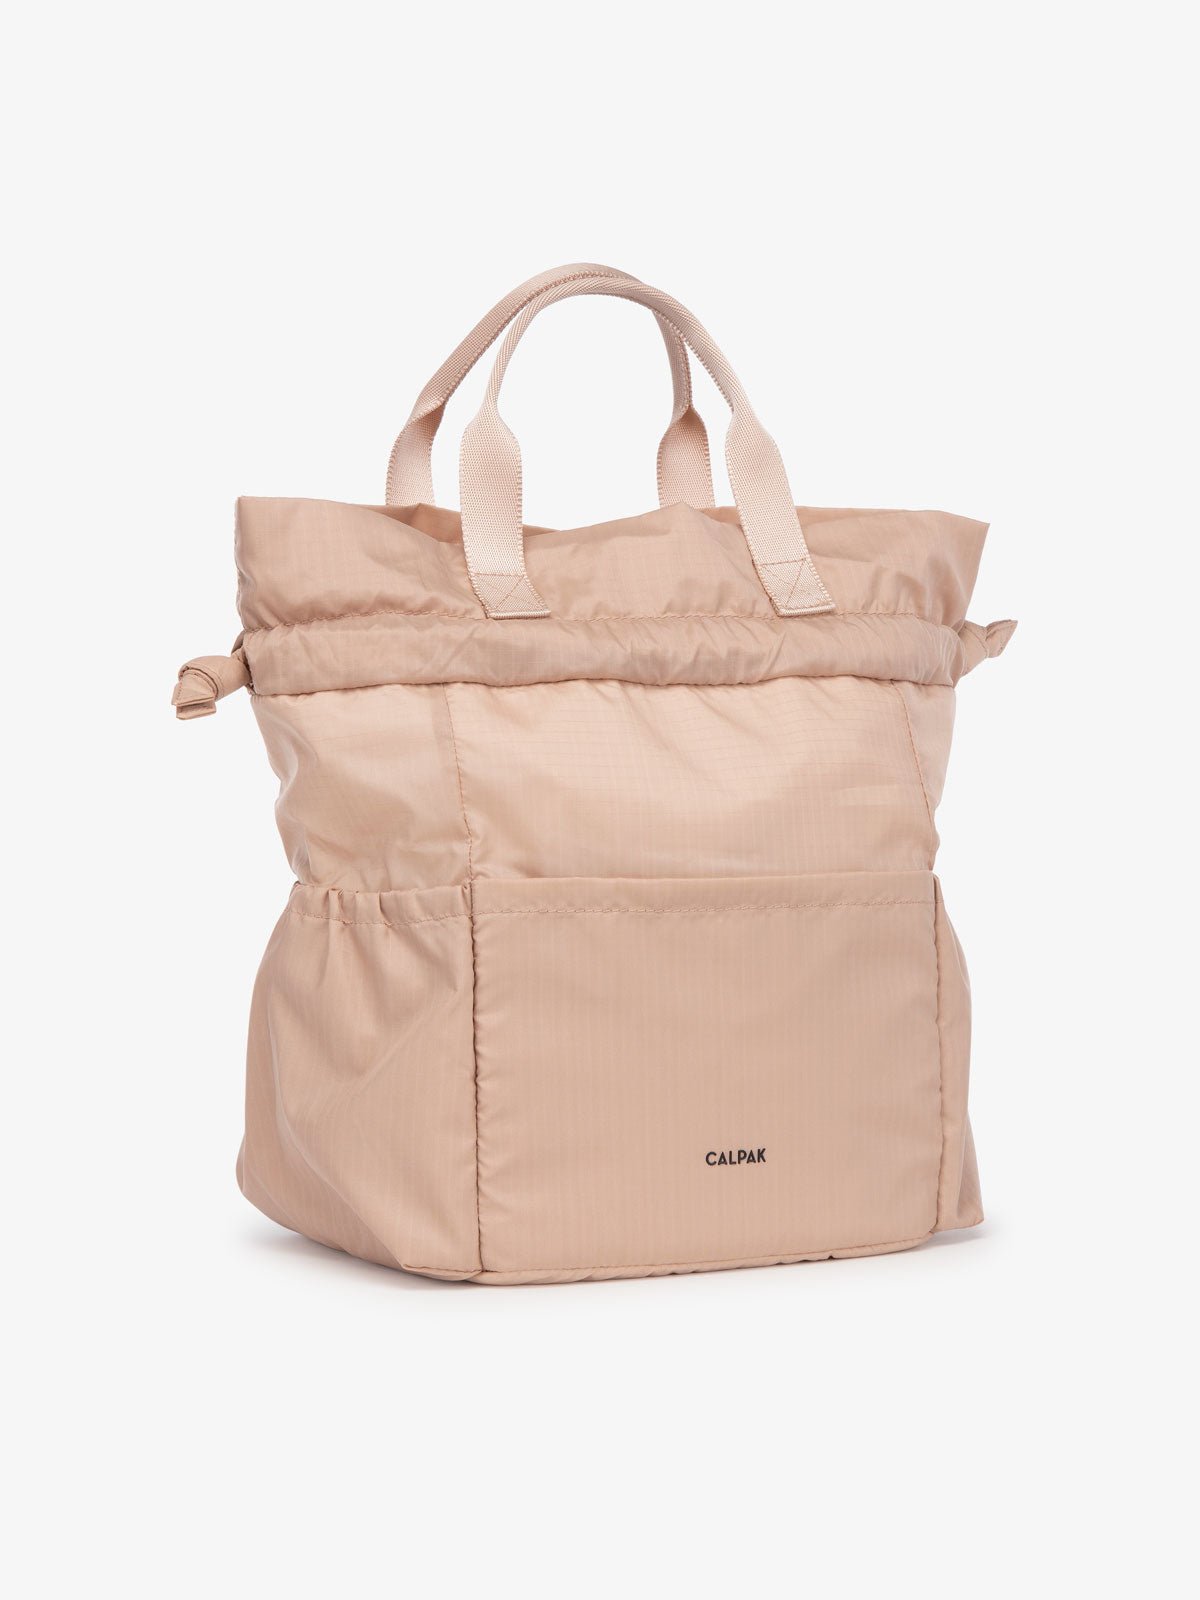 & Insulated Work CALPAK | Lunch Bag for Travel